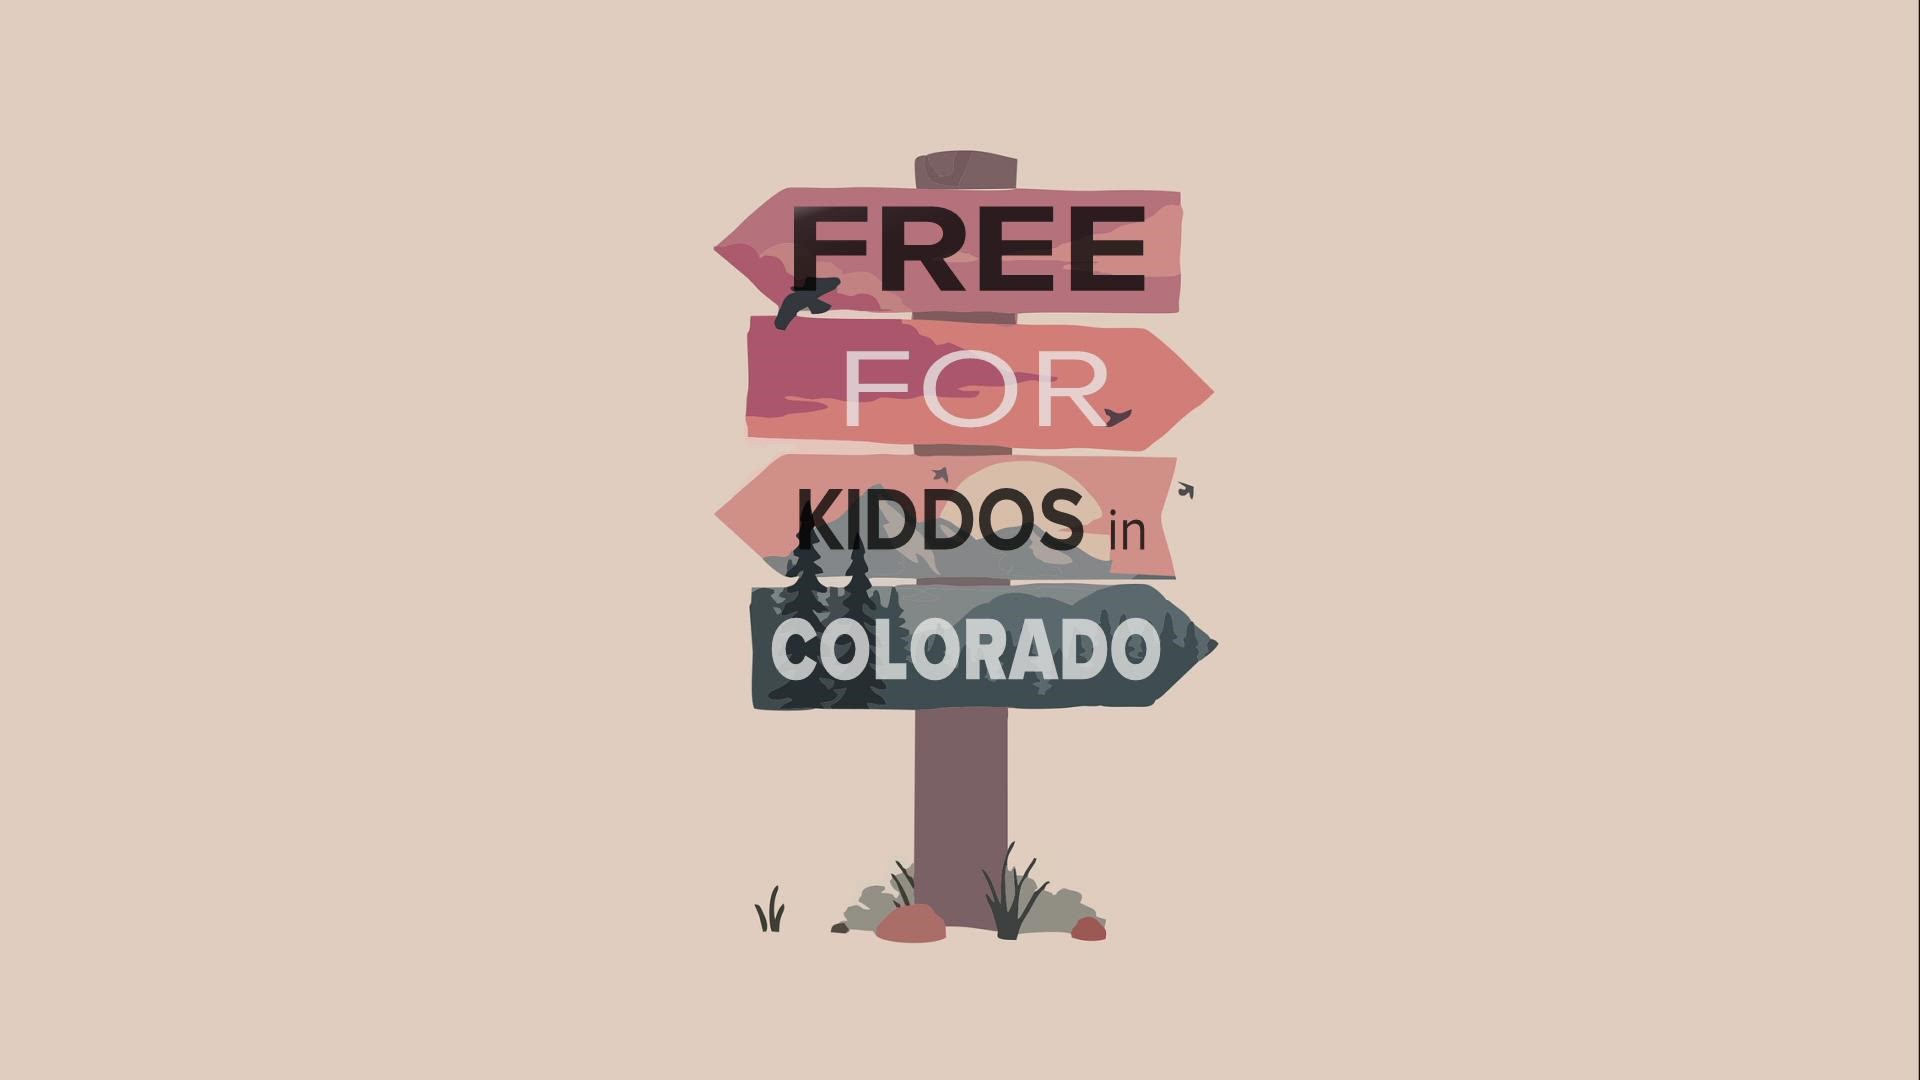 There's lots of free events for the kiddos and families this 2022 Independence Day weekend in Colorado.